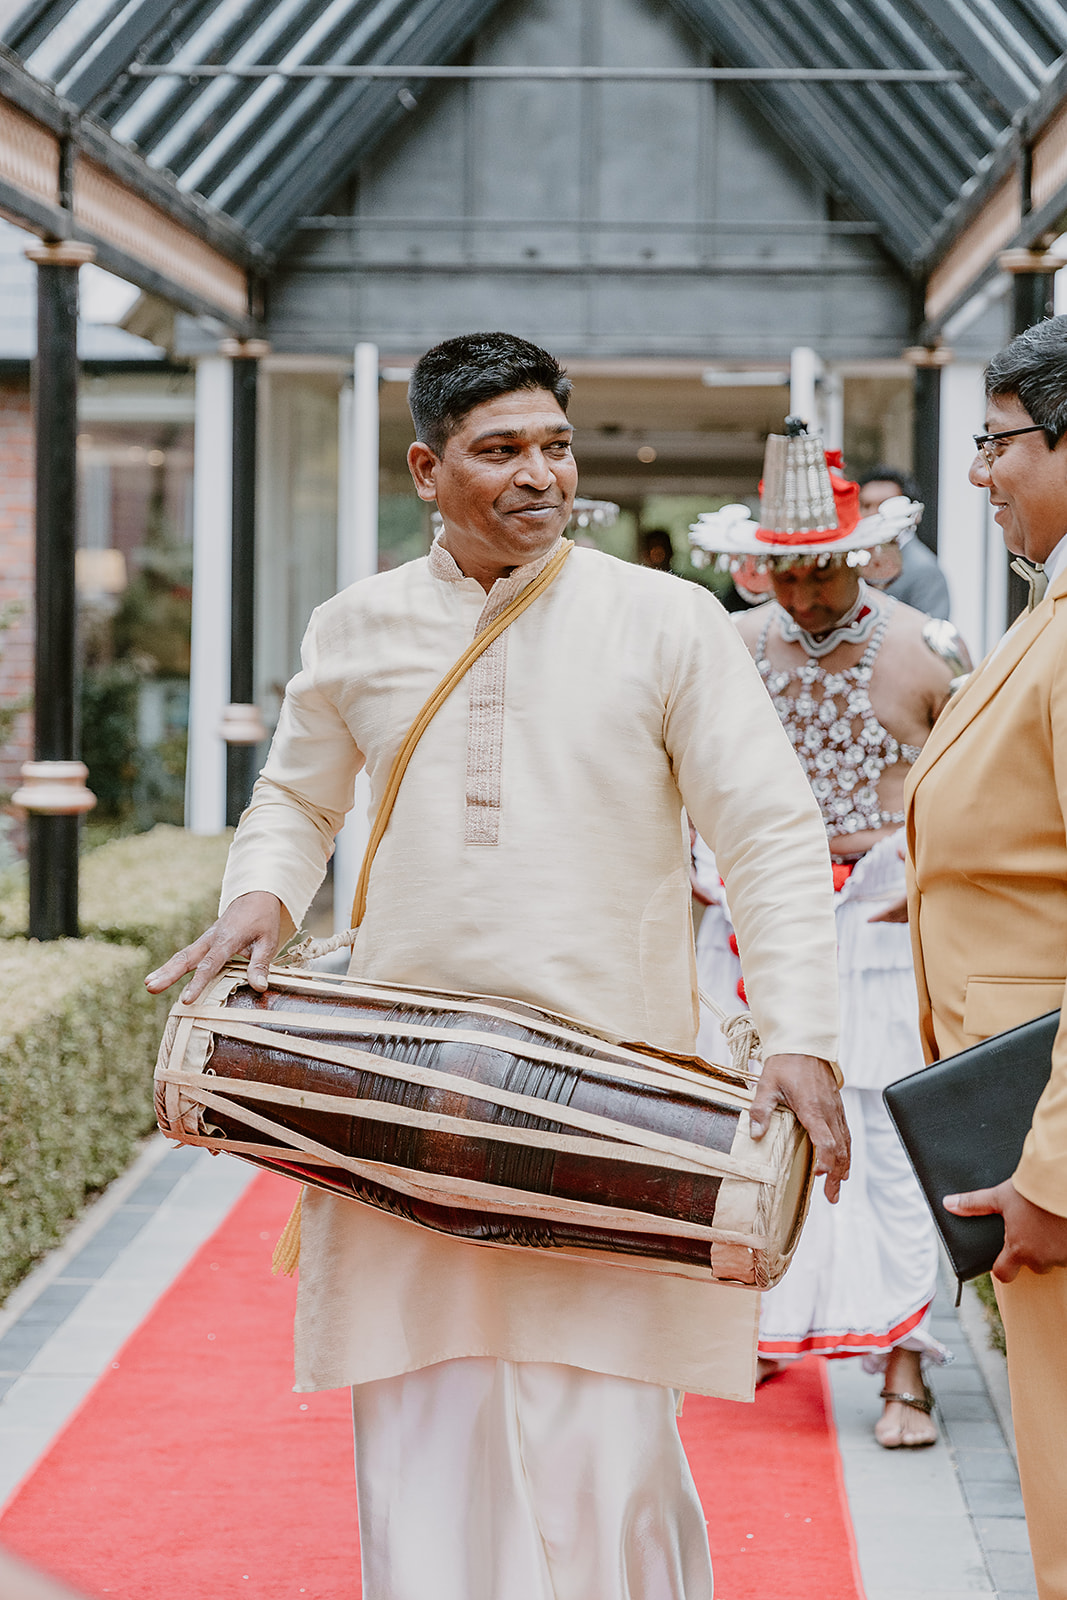 traditional Sri Lankan wedding drummers and dancers